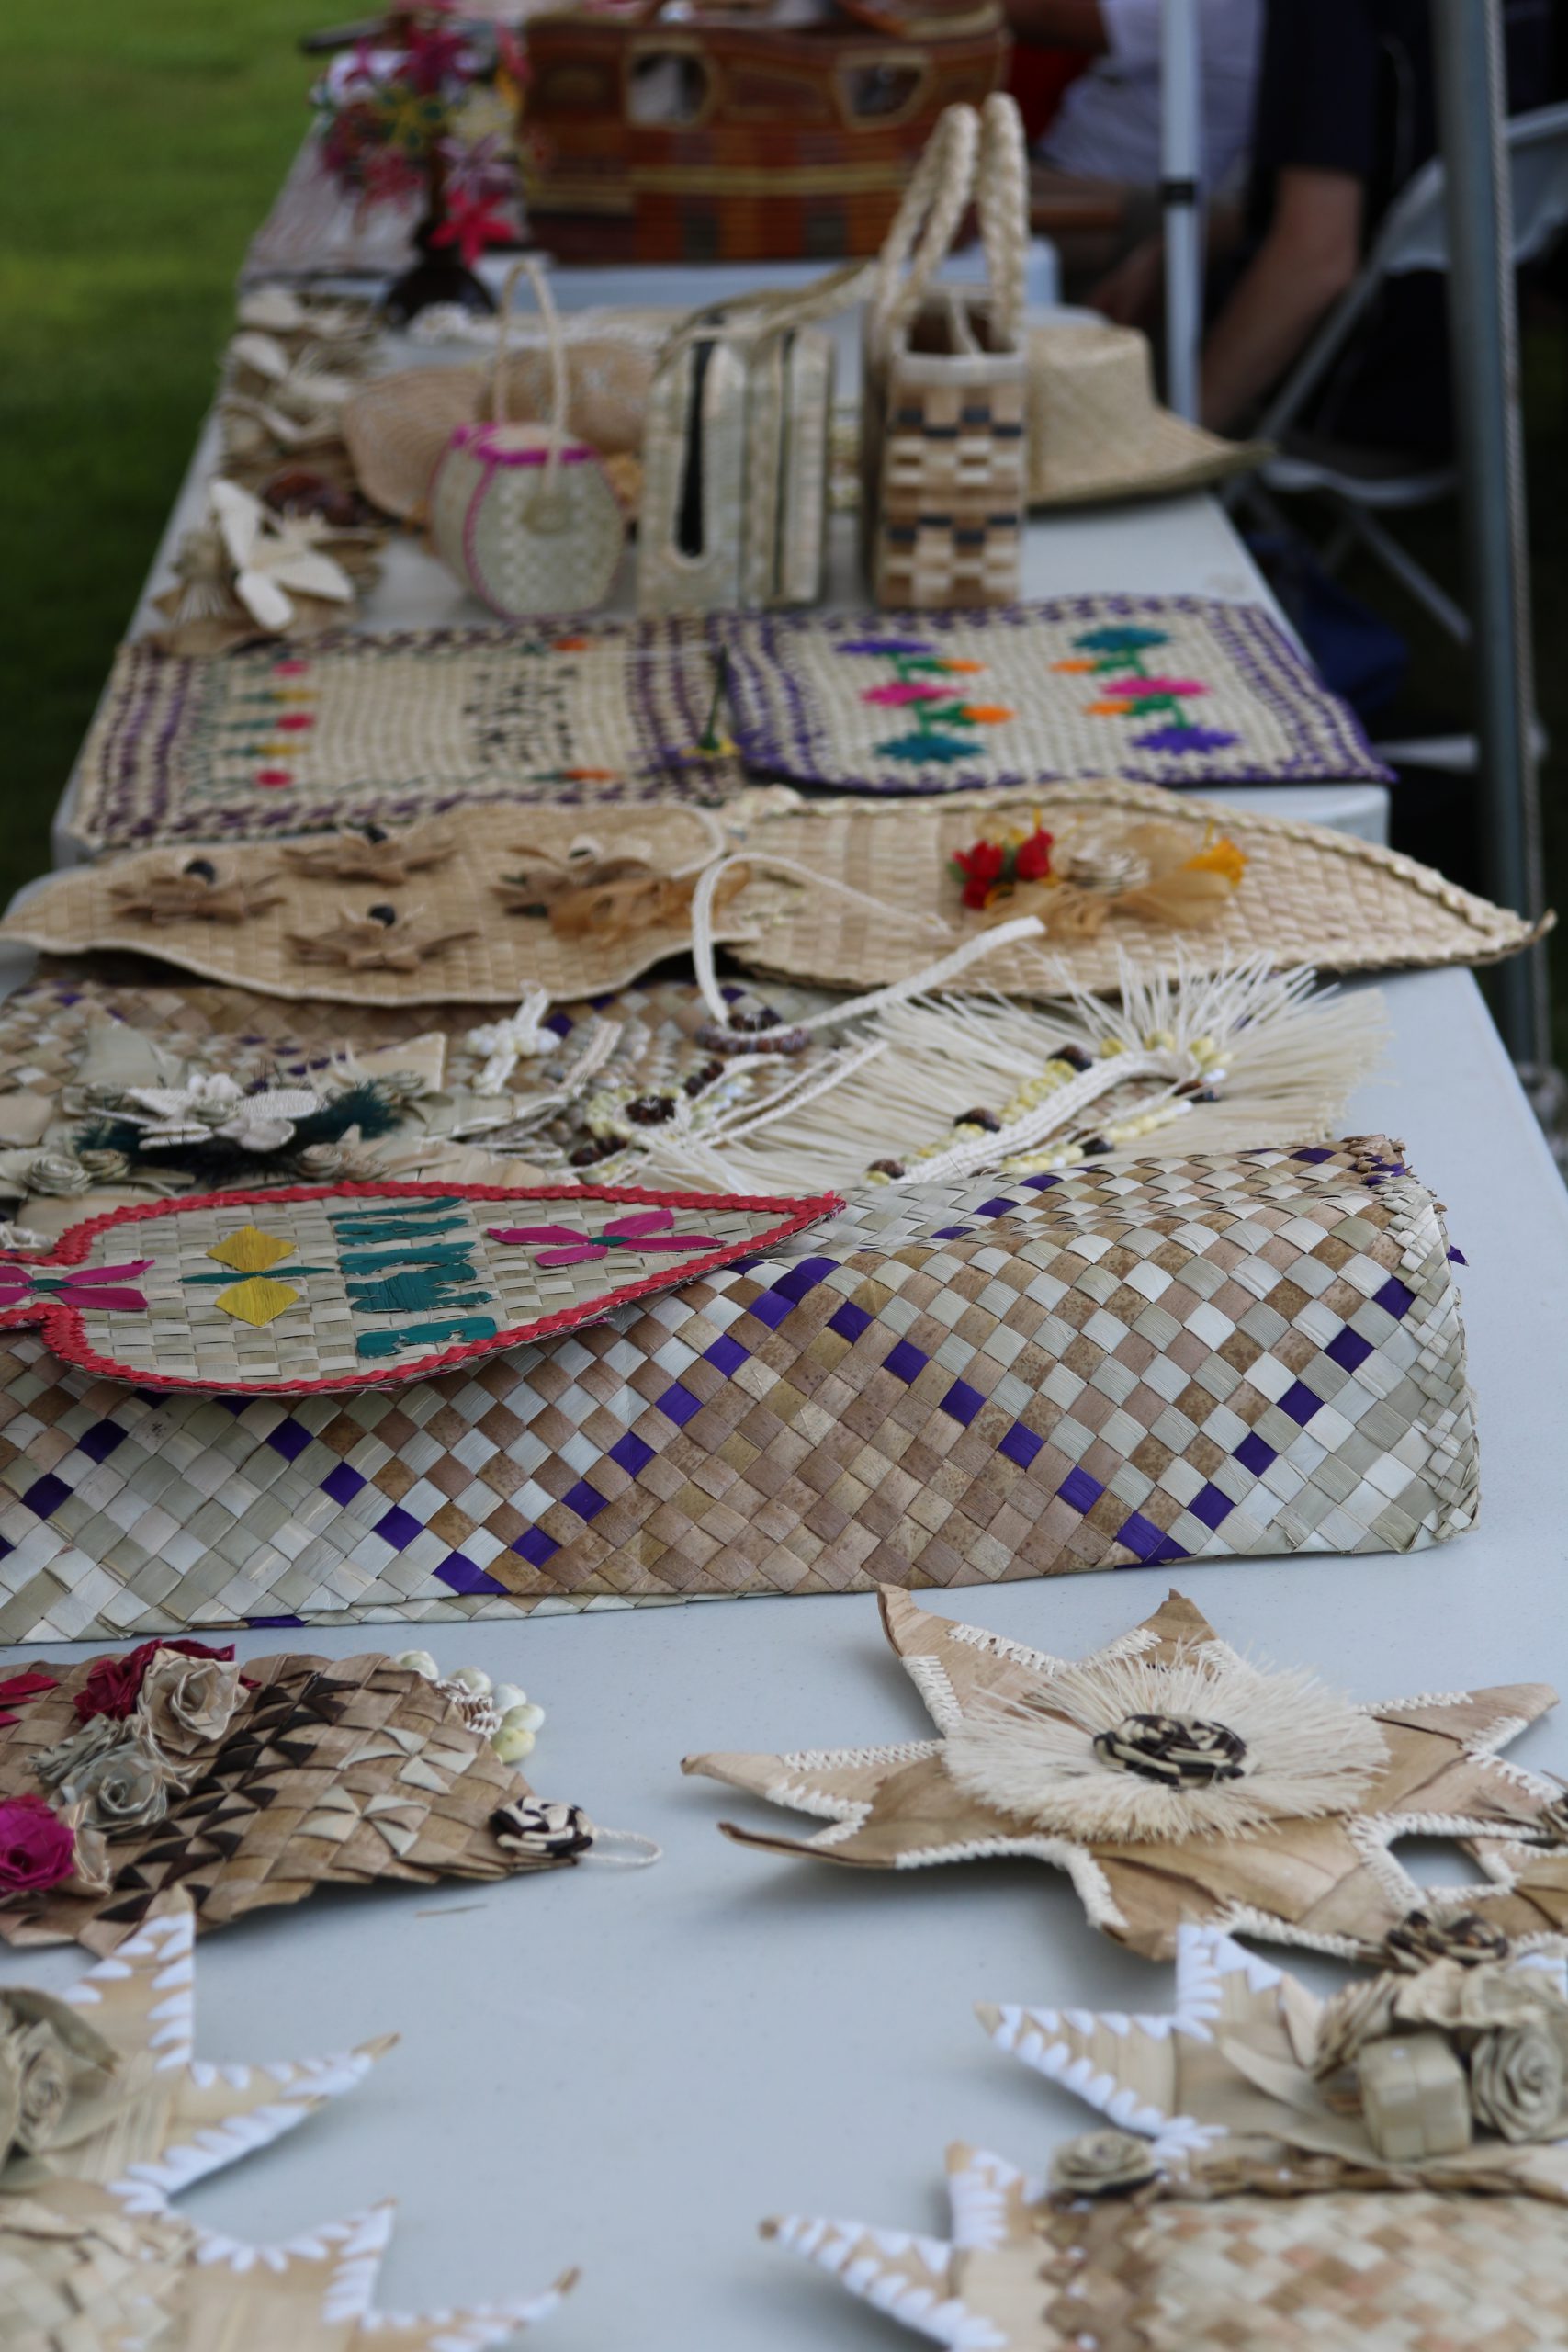 Image of woven crafts from Pacific Islander cultures